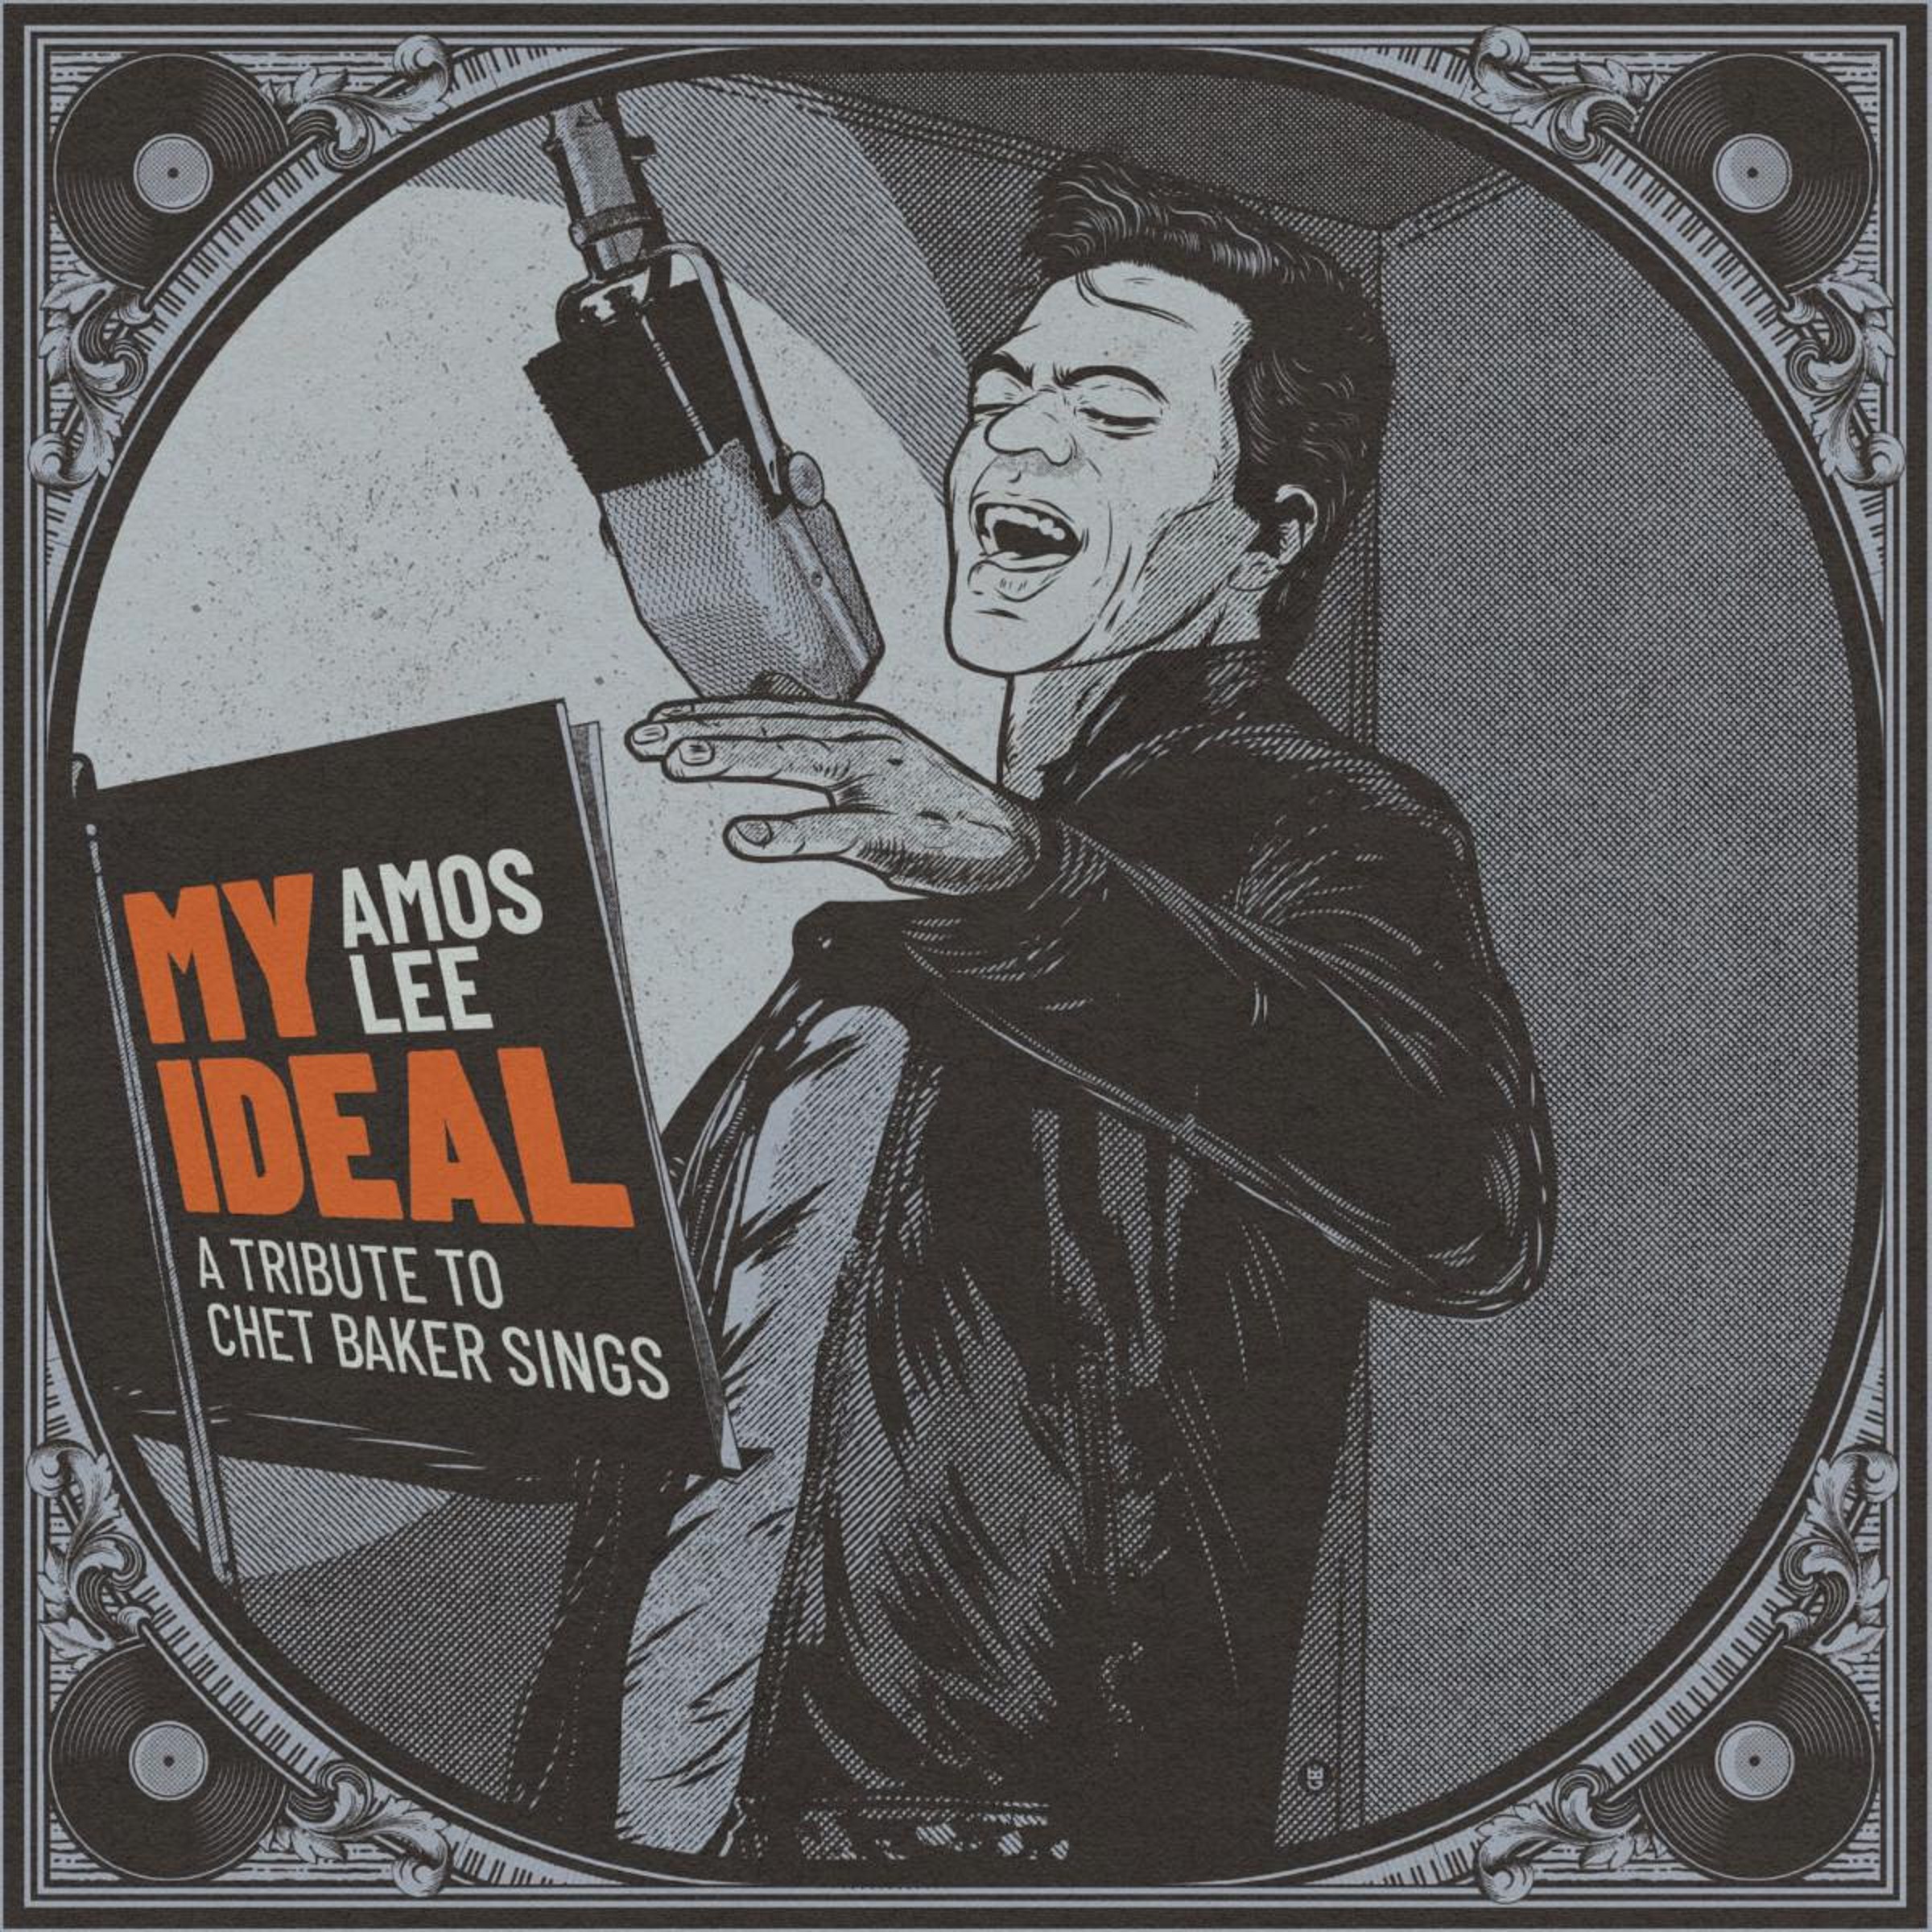 Amos Lee starts his year-end celebrations right w. a toast to iconic Chet Baker on 'My Ideal'